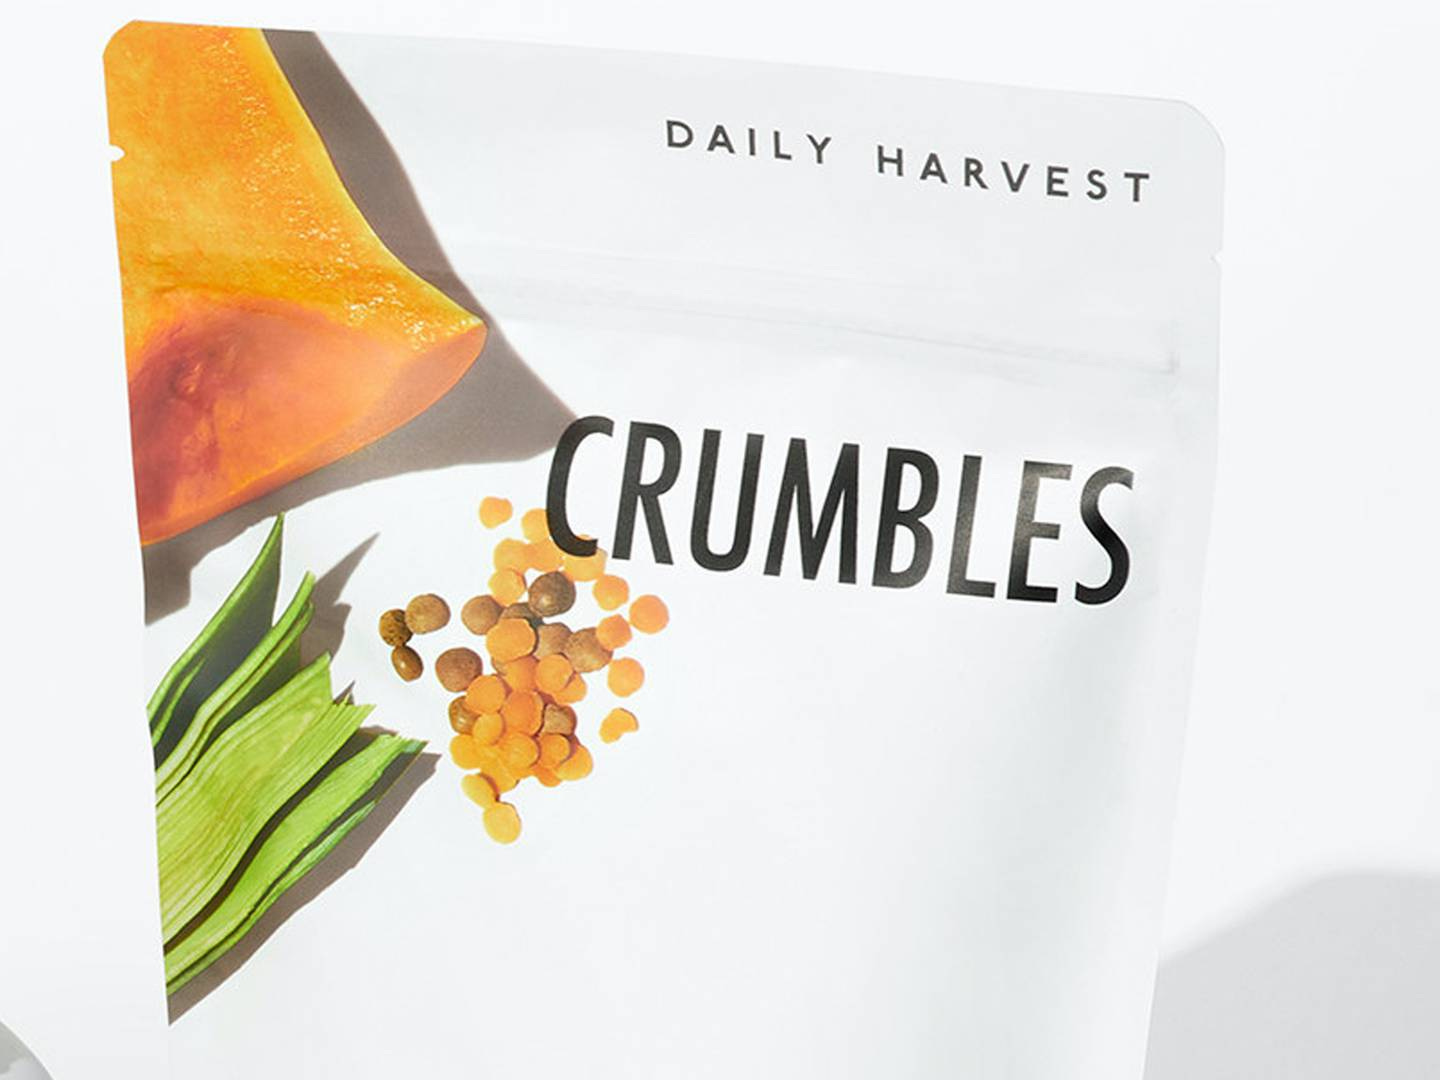 Photo of a package of Daily Harvest French Lentil and Leek Crumbles.